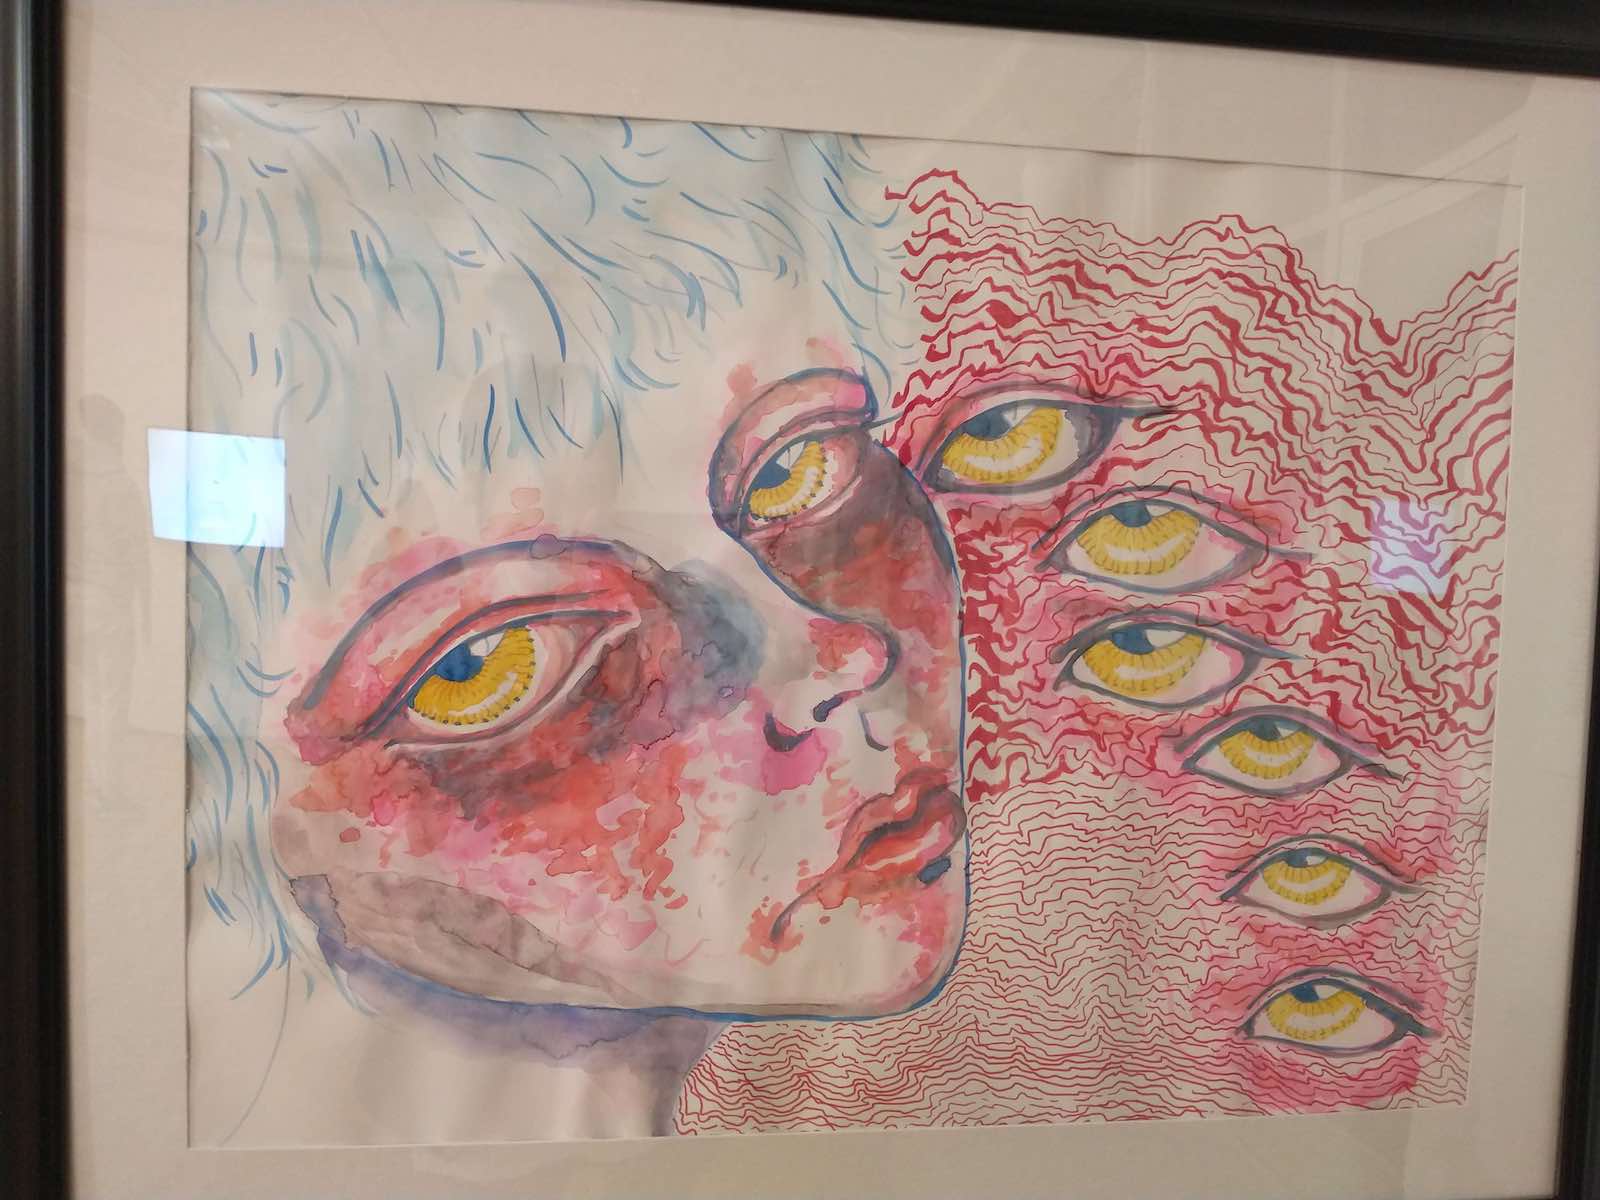 An artwork showing a womans face with freestanding eyes next to her